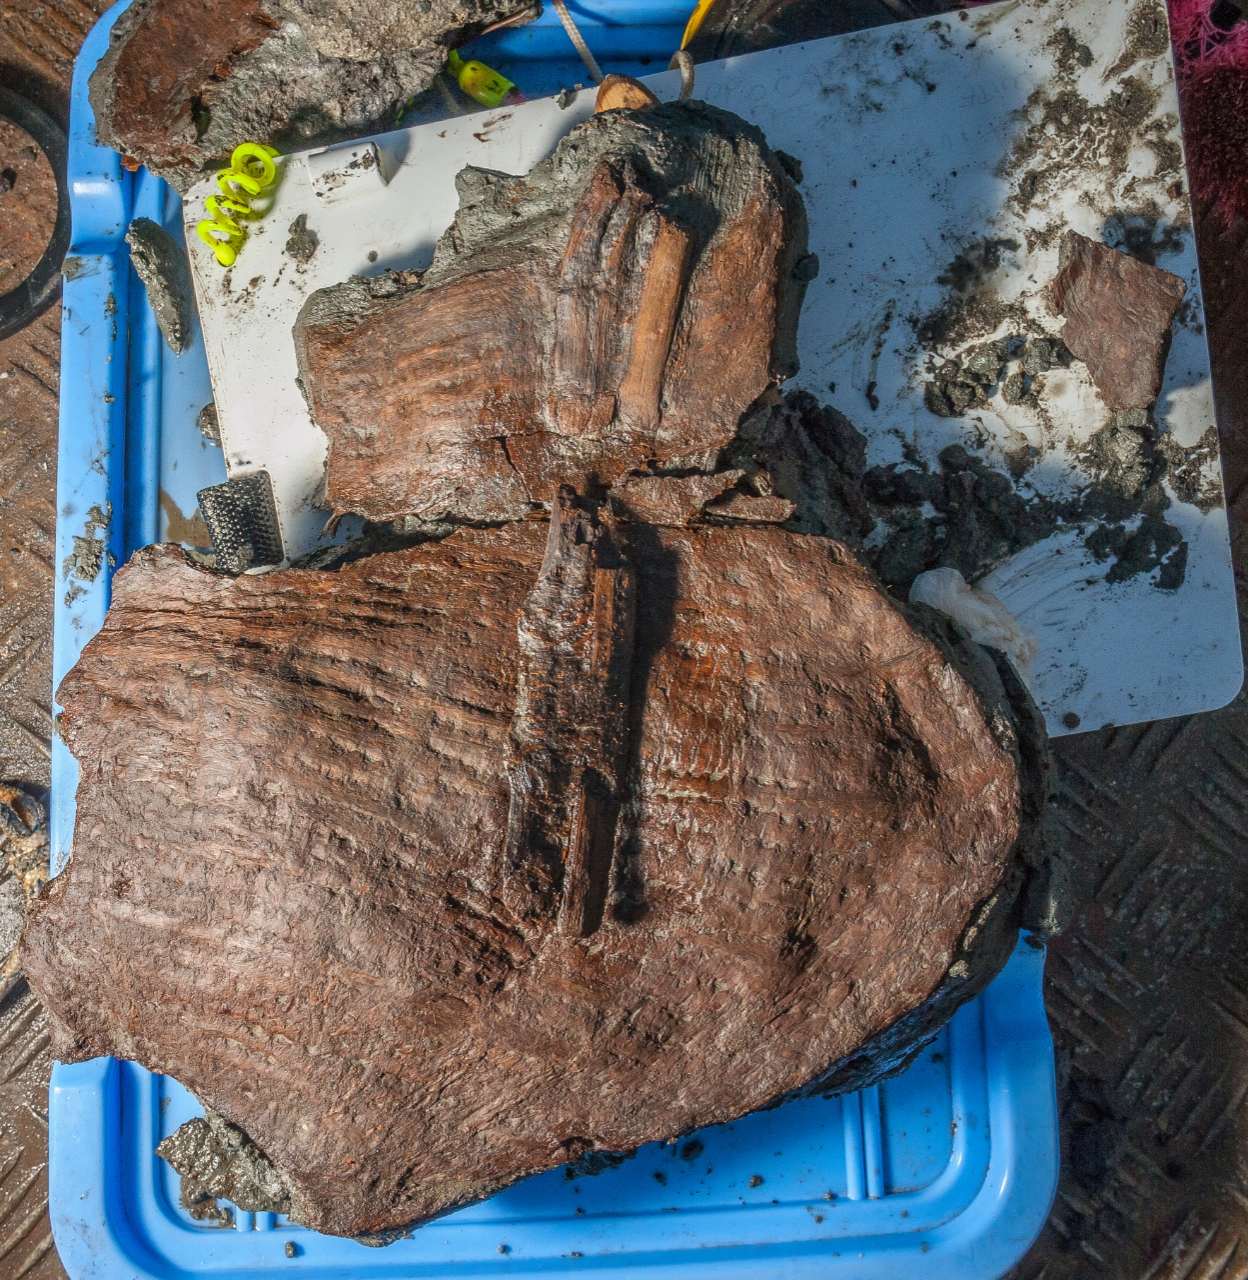 2,400-year-old baskets still filled with fruit found in the submerged Egyptian city 2